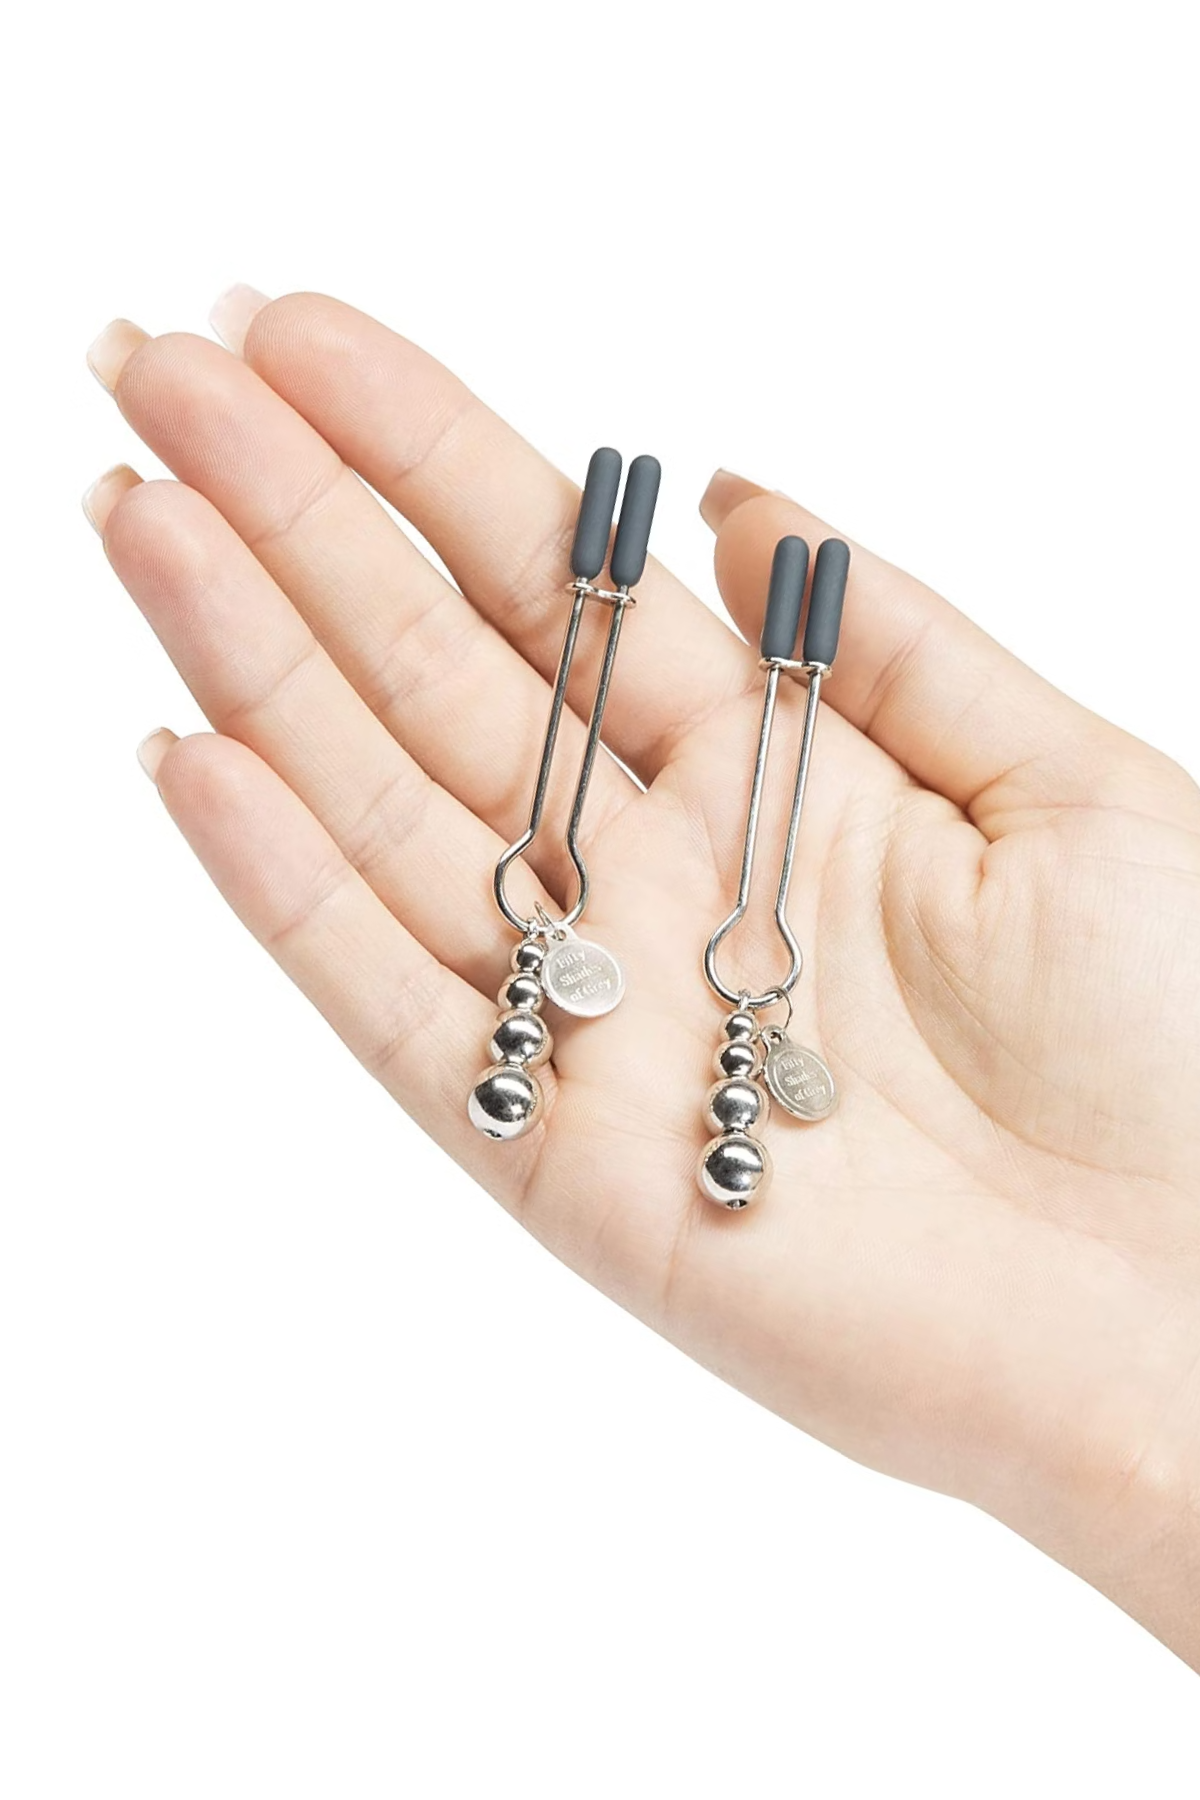 The Pinch | Adjustable Nipple Clamps